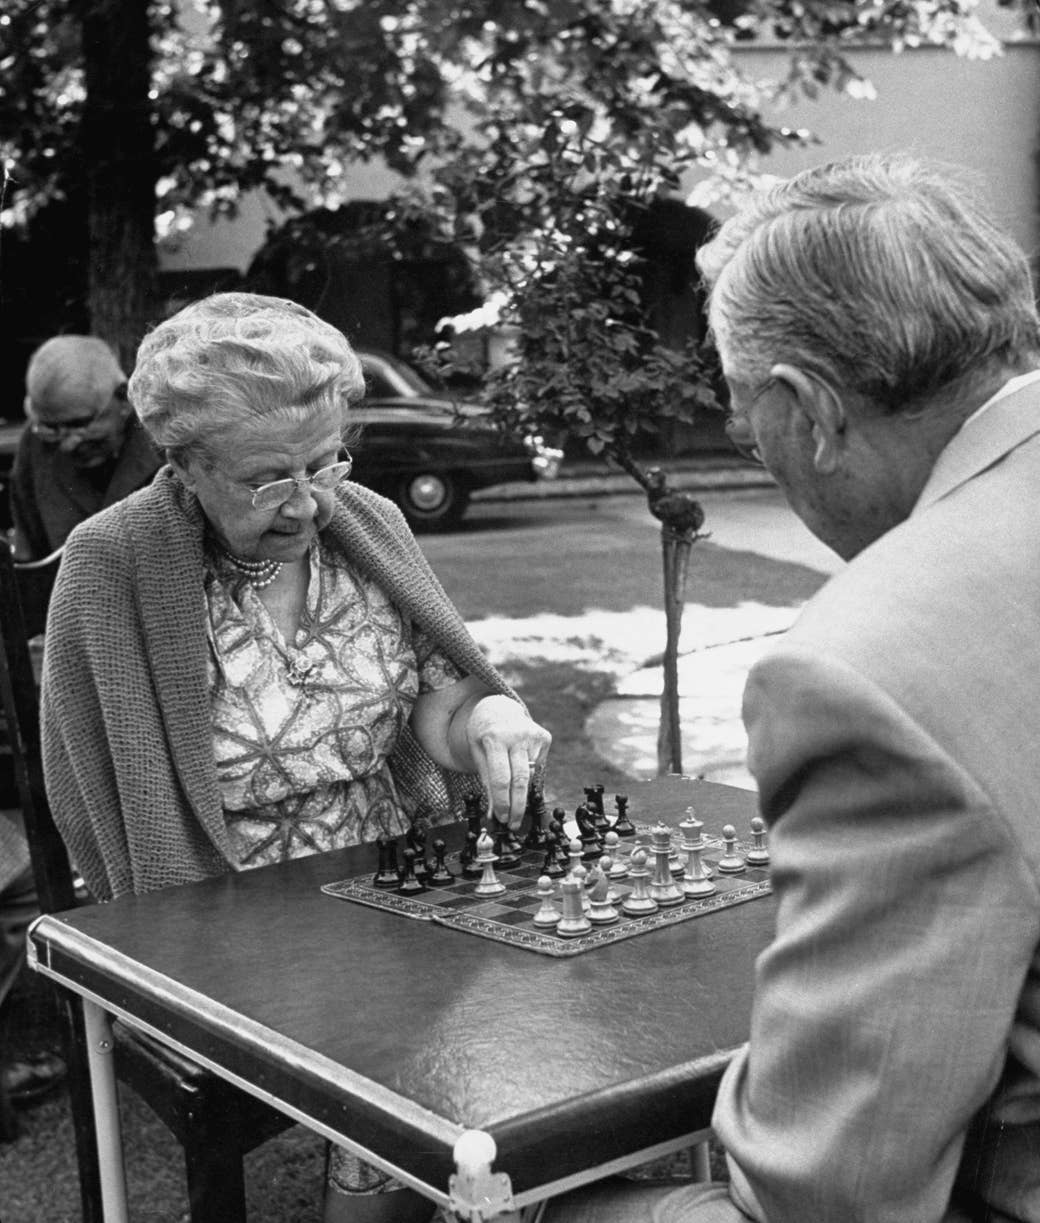 An older woman and an older man play chess outside on a sunny day